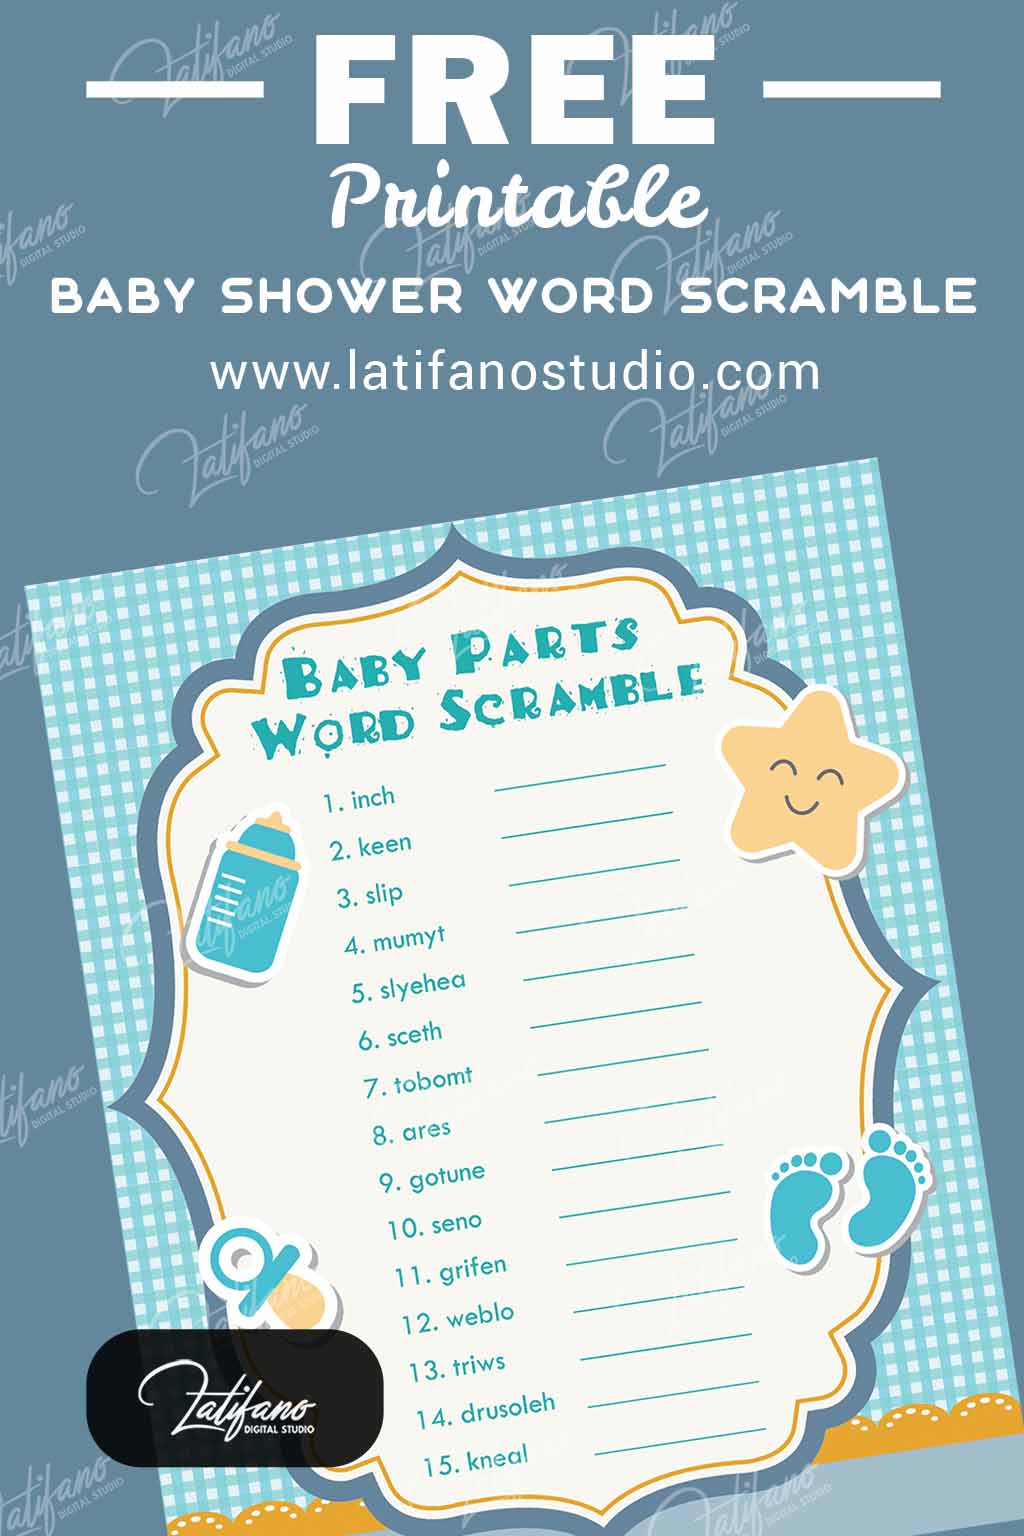 free printable baby shower word scramble with answer key